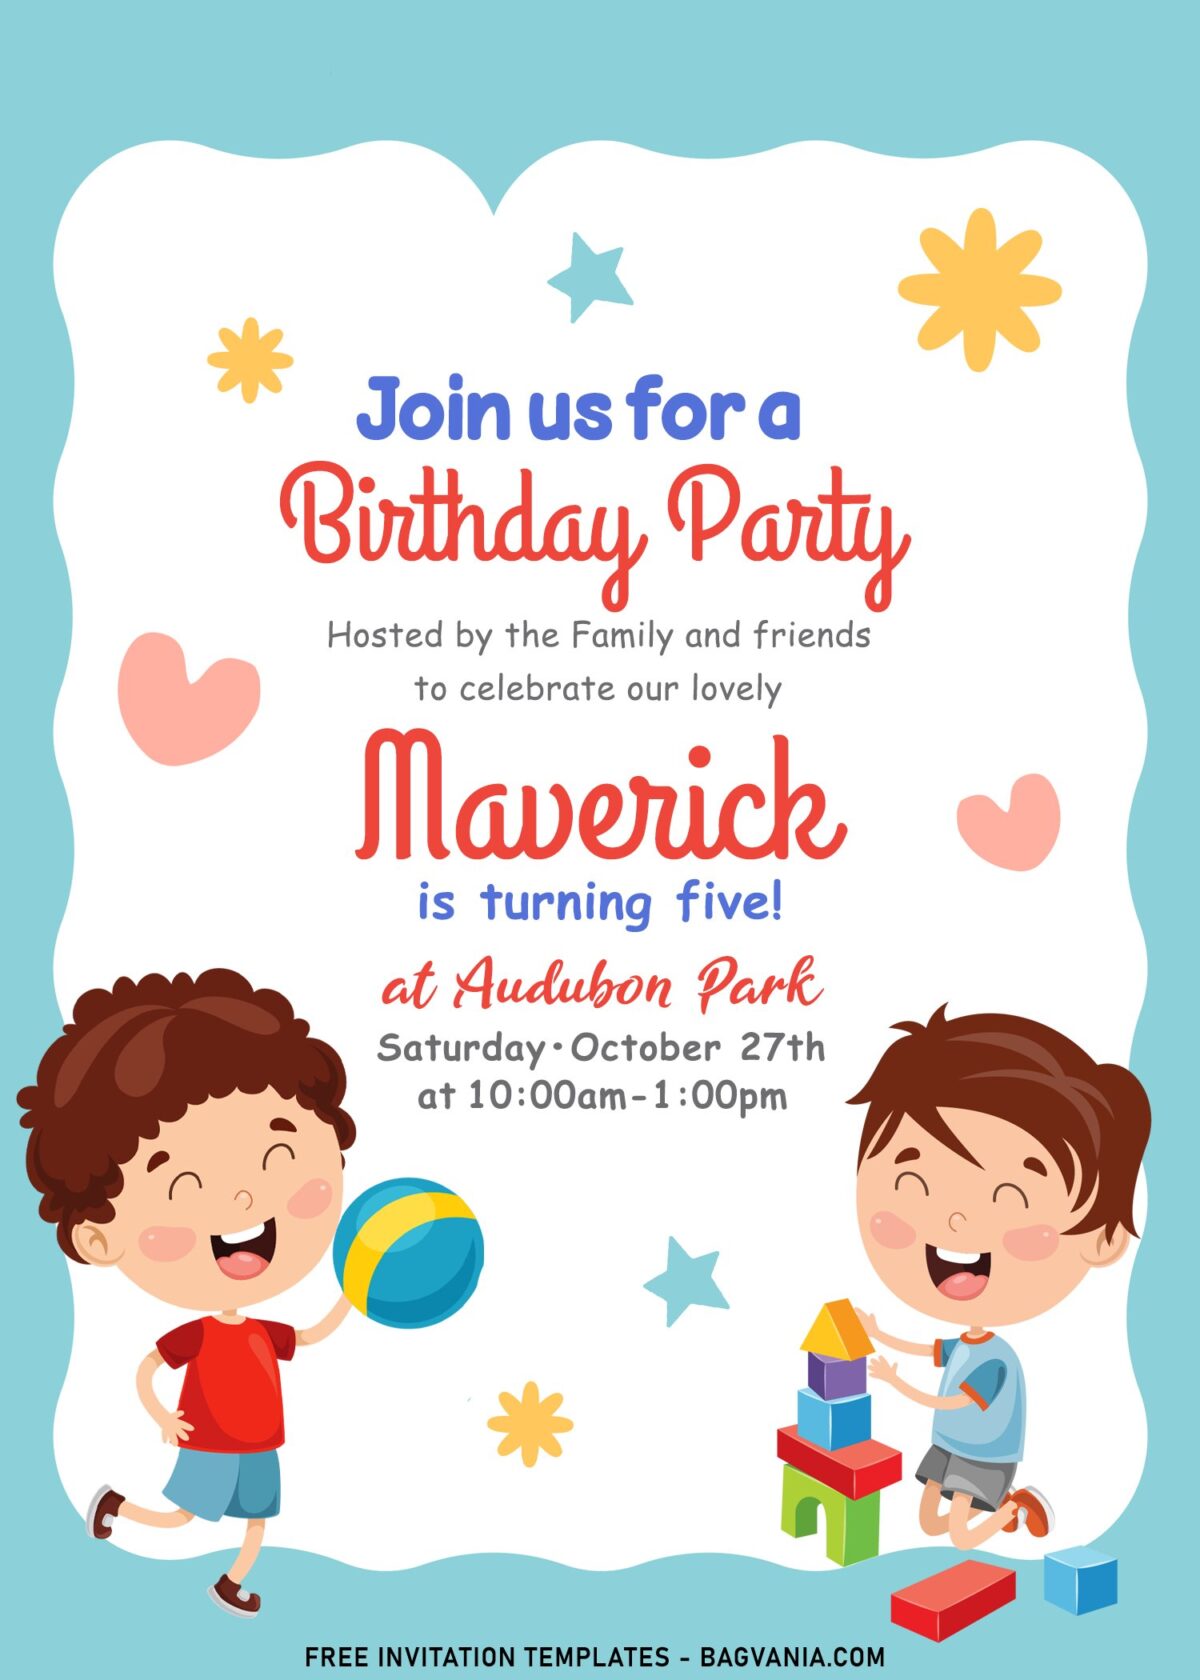 9+ Playful And Adorable Kids Birthday Invitation Templates For All Ages